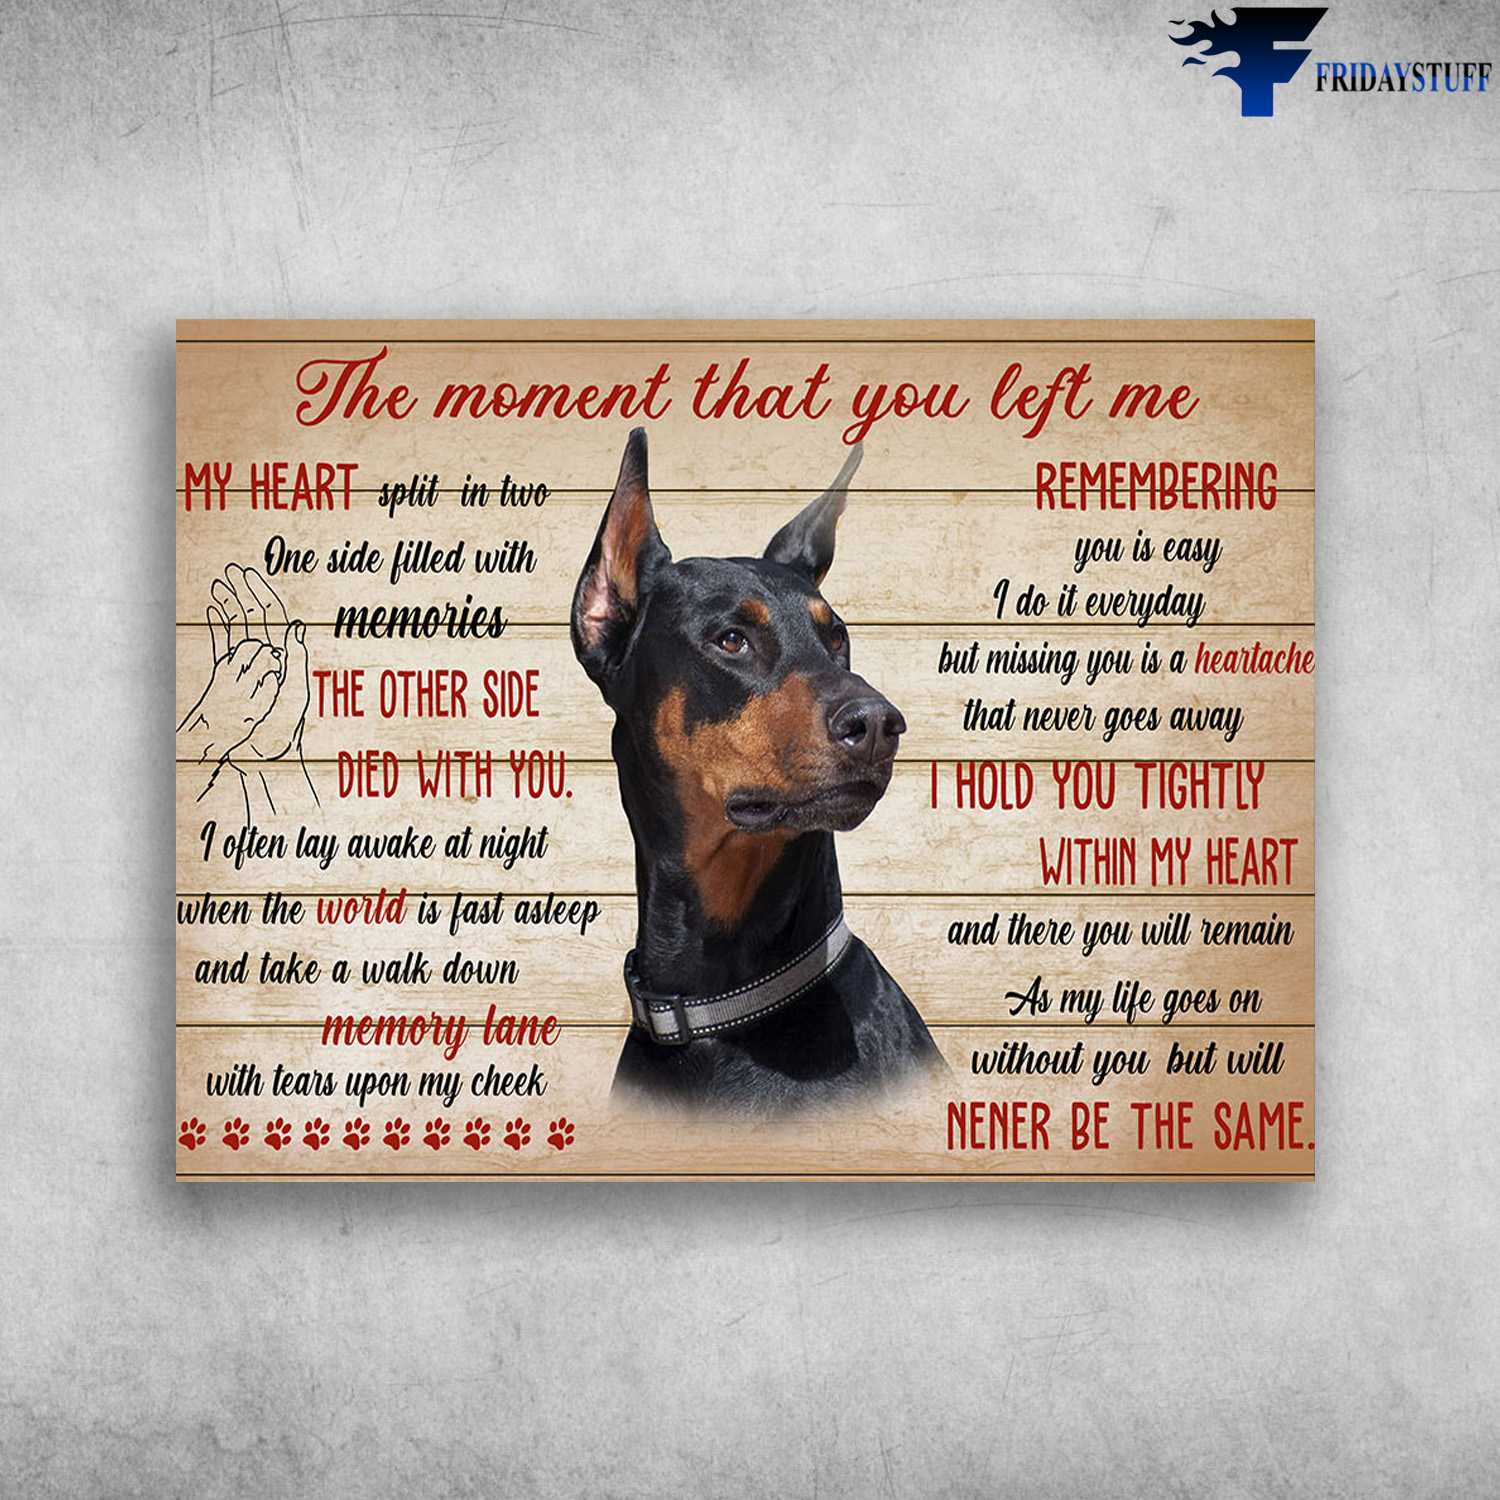 Dobermann Dog, Dog Lover - The Moment That You Left Me, My Heart Split In Two, One Side Filled With Memoties, The Other Side, Died With You